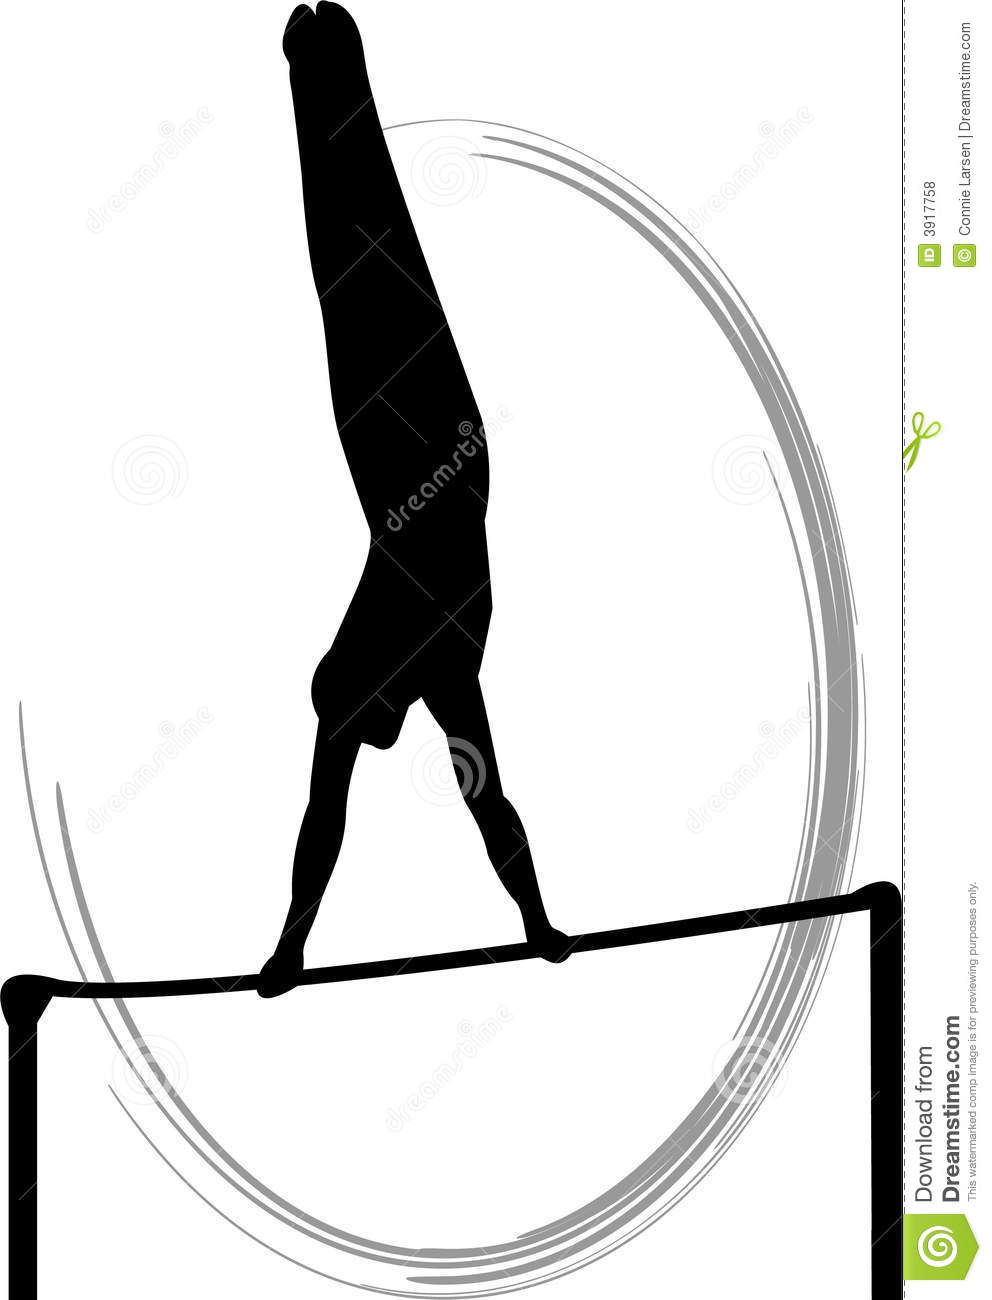     Of A Male Gymnast Executing Giant Swings On The Horizontal High Bar